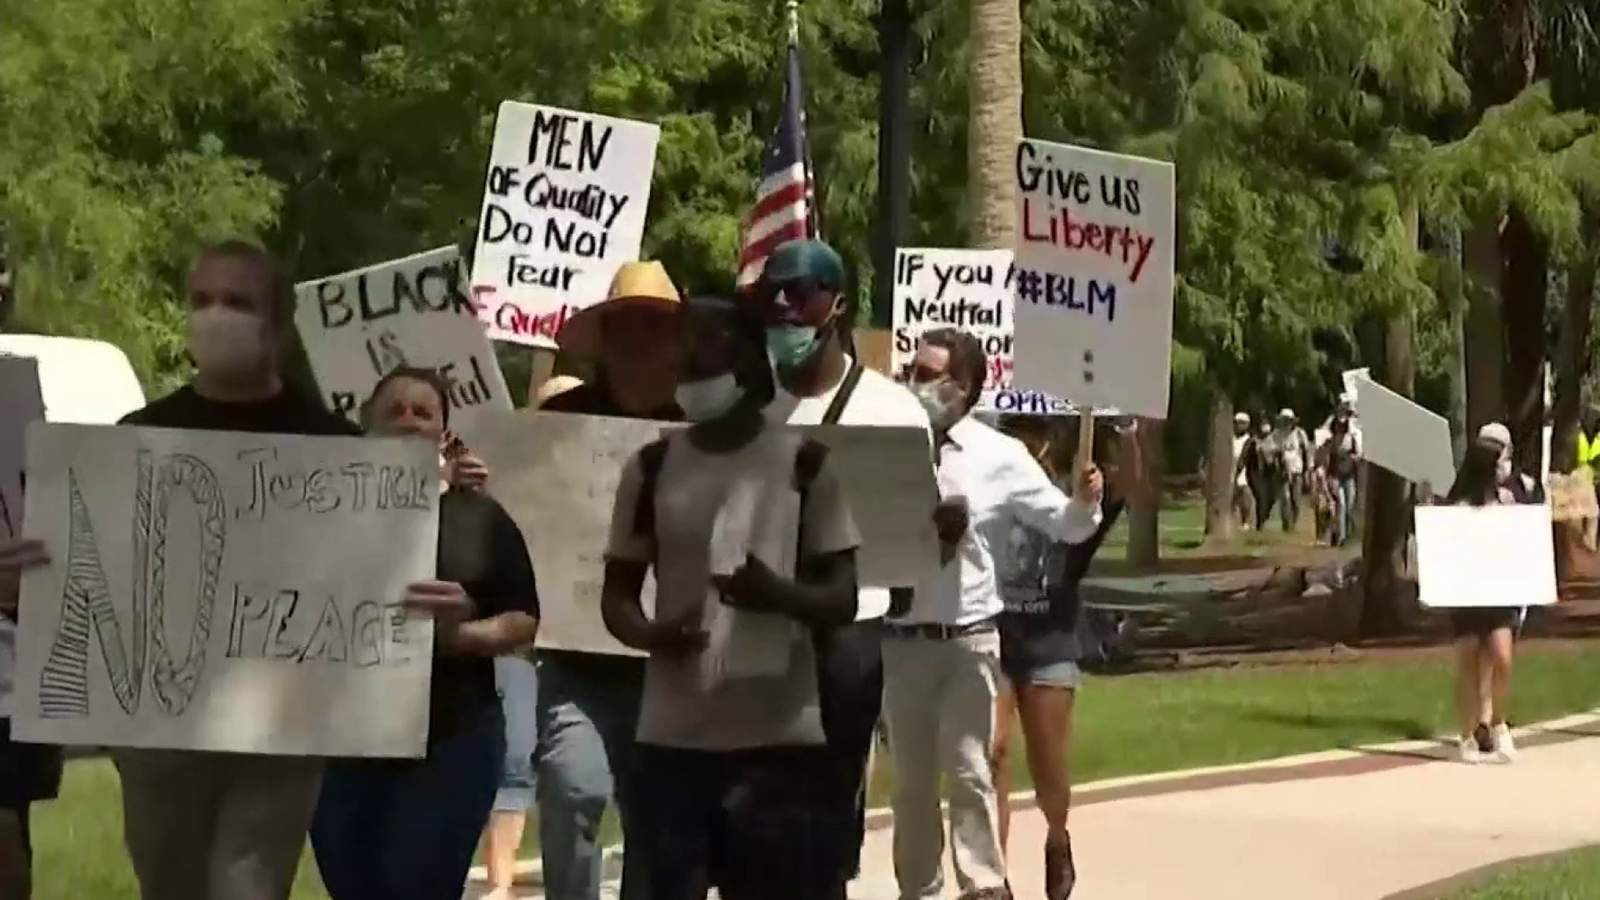 Black leaders across Central Florida call for change, unity after George Floyds death